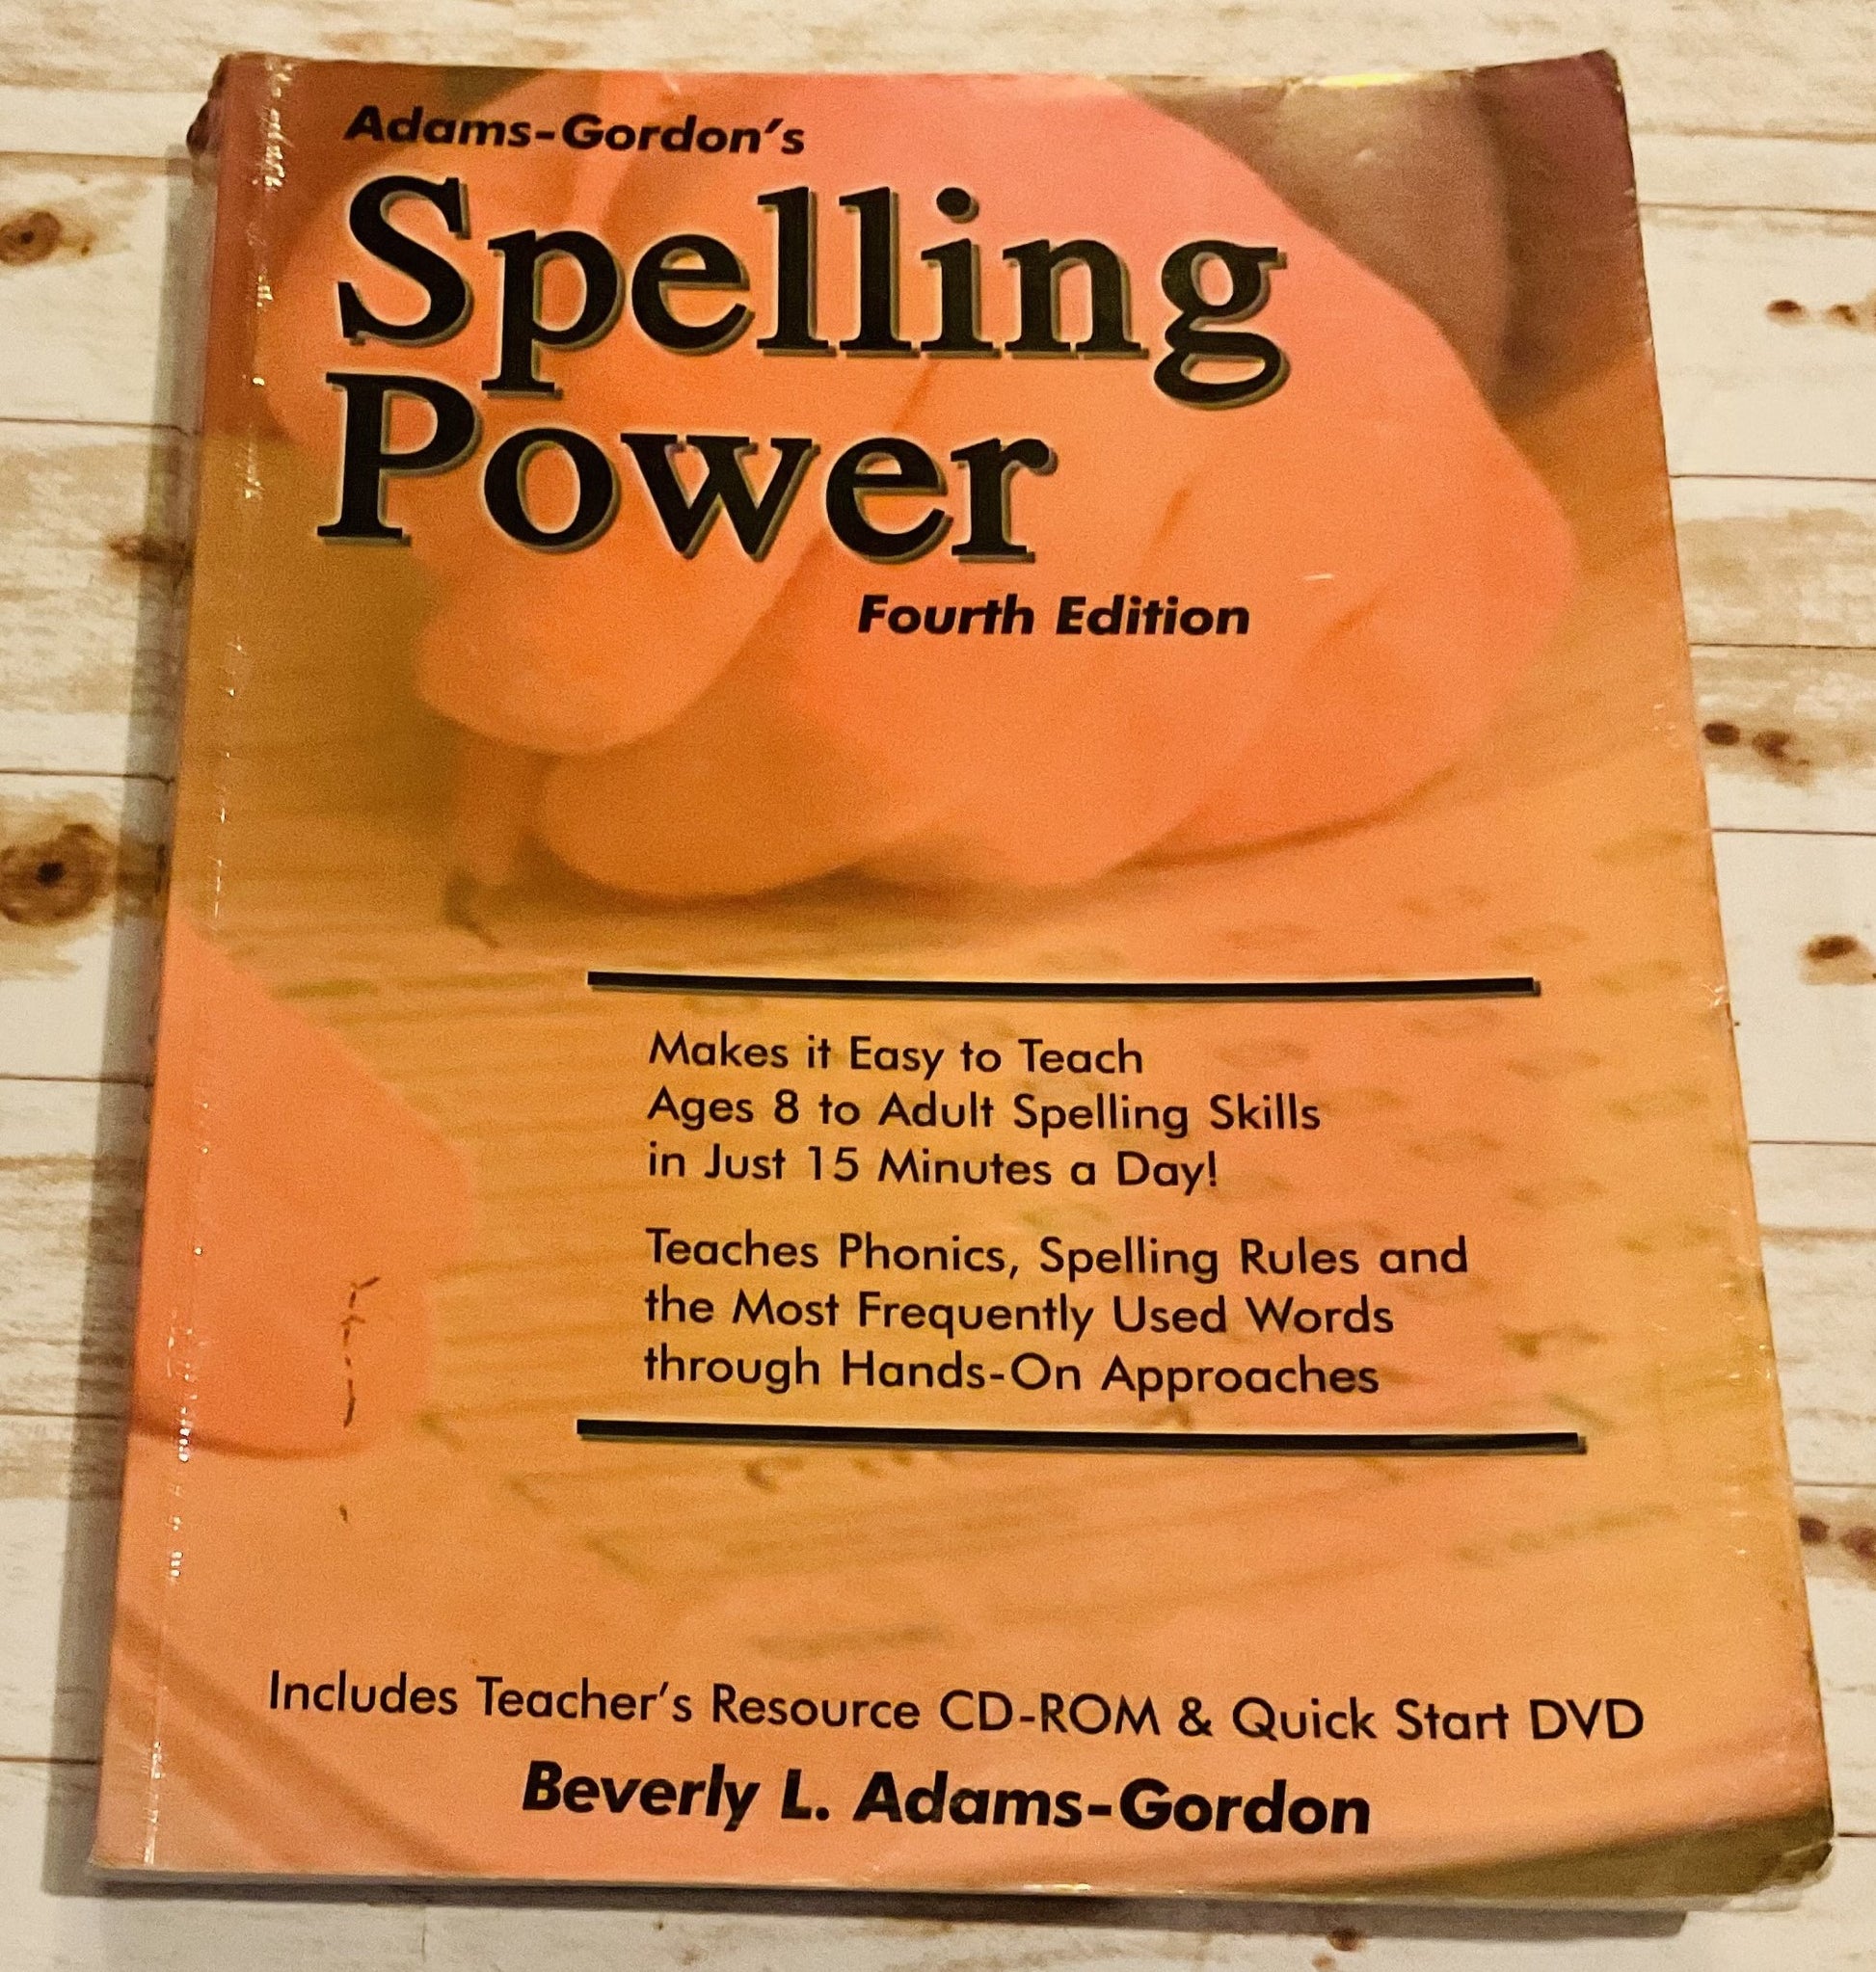 Spelling Power, 4th Edition - Anchored Homeschool Resource Center